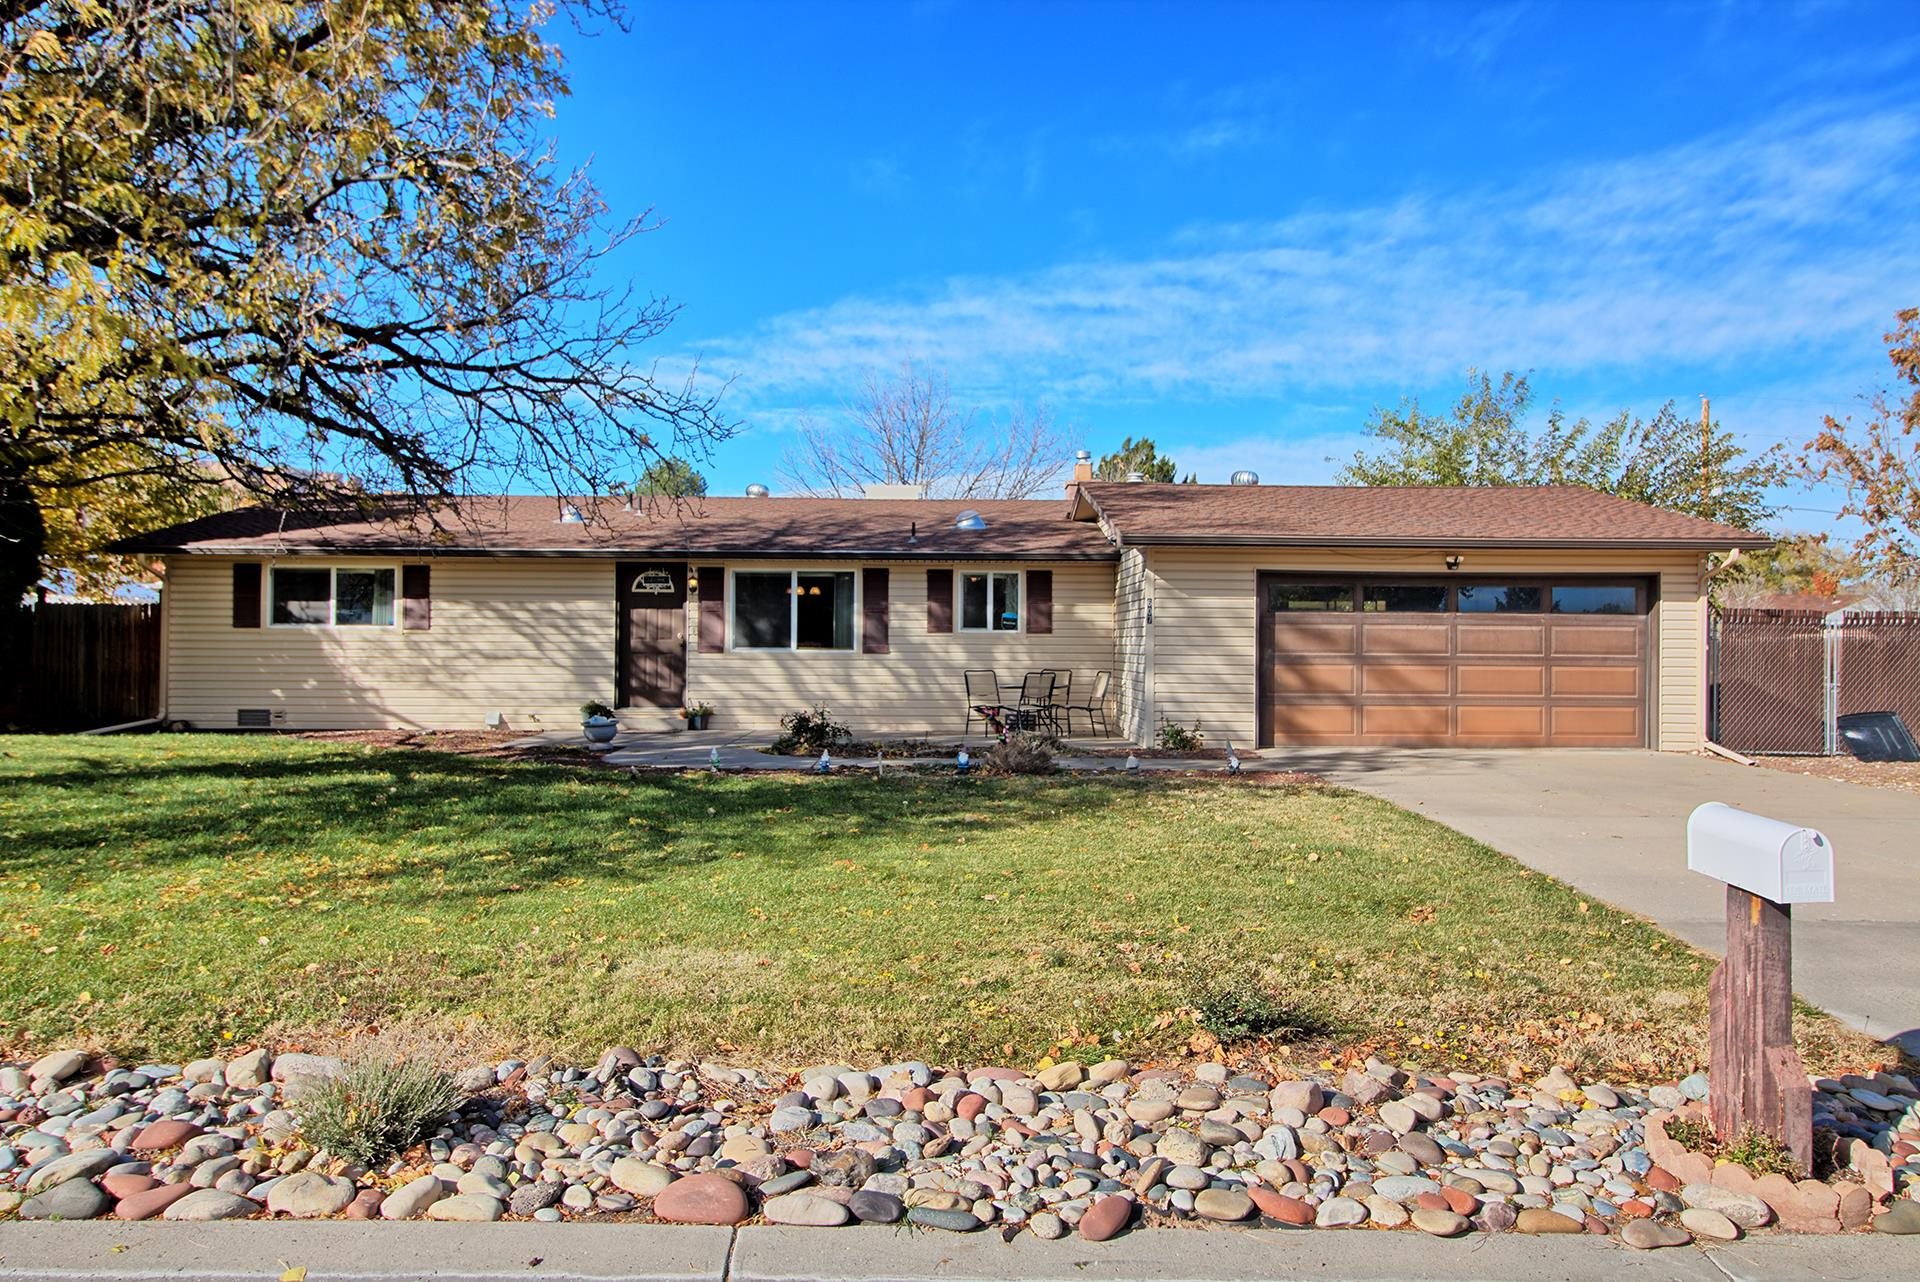 REDLANDS RANCHER! PRICED TO SELL UNDER $400,000.00. REMODELED KITCHEN WITH A LARGE EAT IN DINING AREA. ENJOY THE EVENING IN THE COZY LIVING ROOM WITH THE FIREPLACE. BACK YARD HAS ROOM FOR ALL THE BACKYARD ACTIVITIES. DON'T FORGET THE VIEWS!